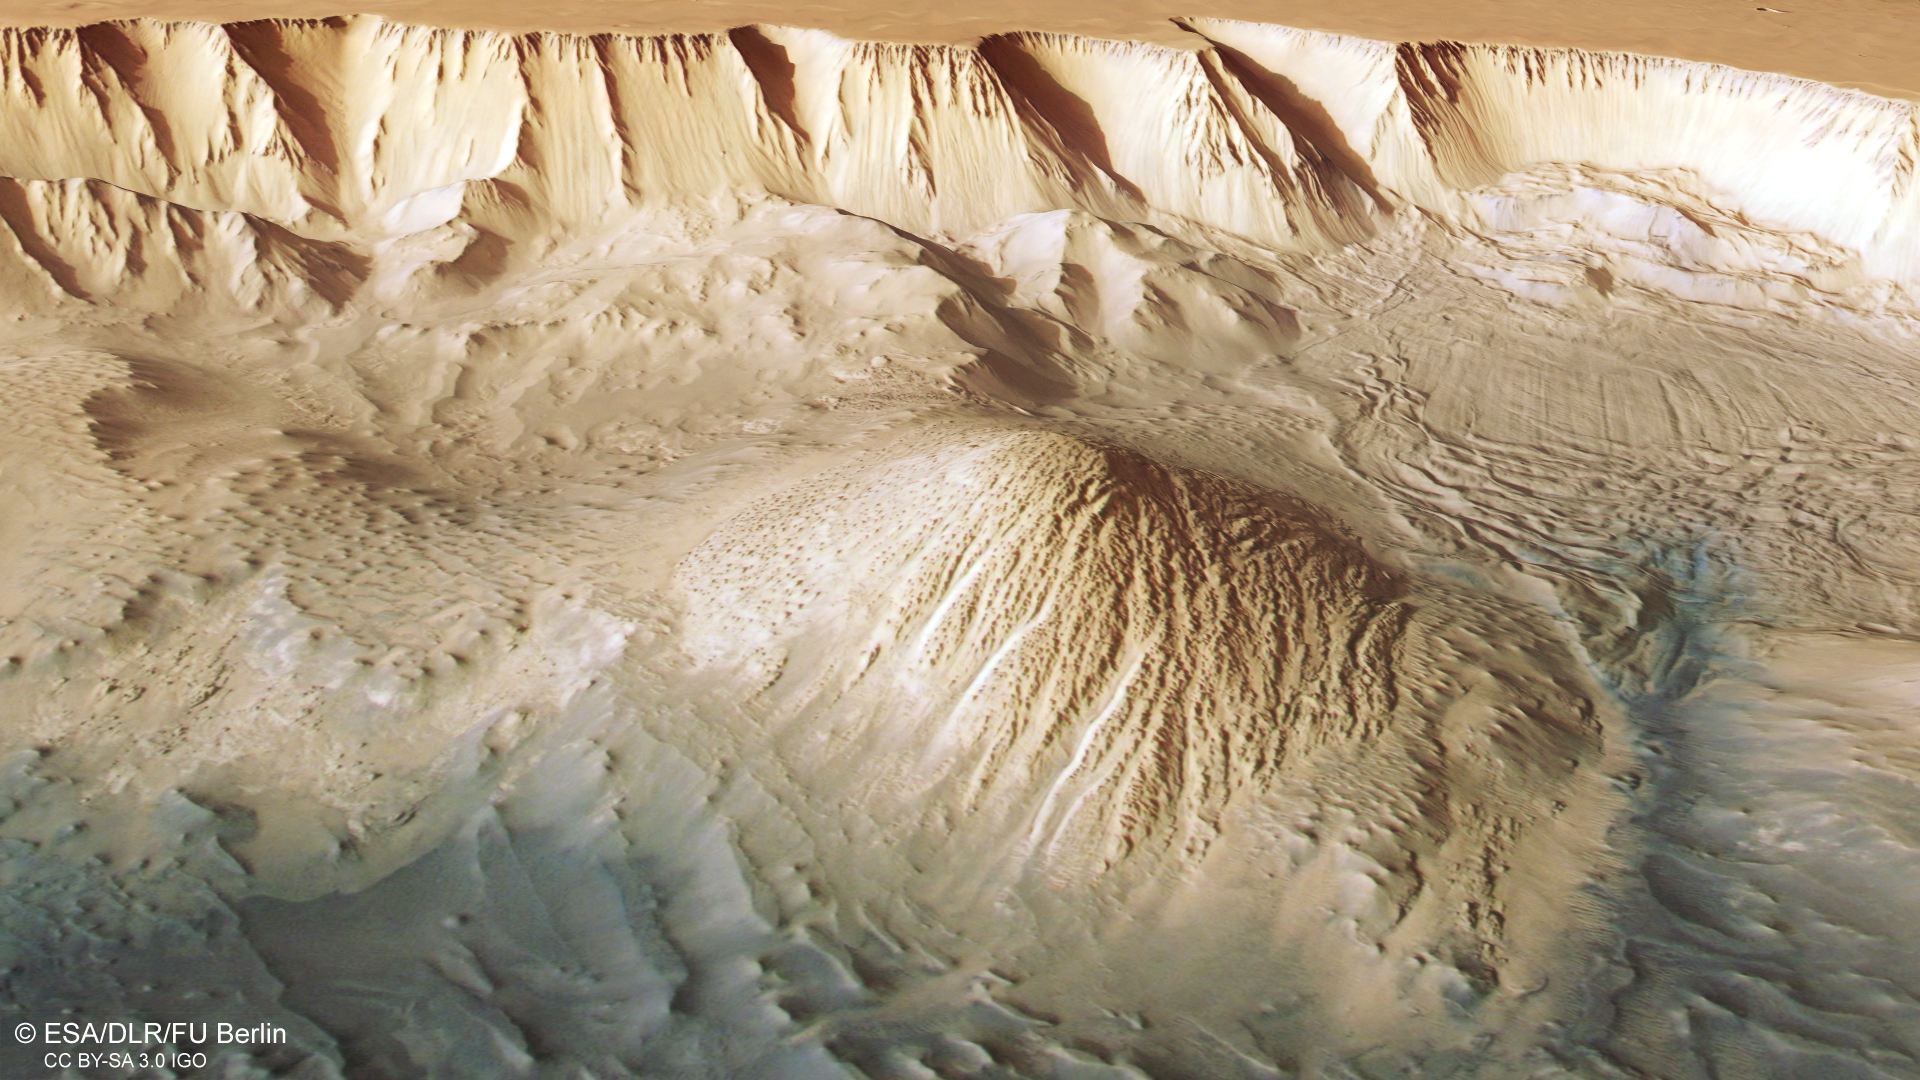 A digital terrain model and the nadir and colour channels of the High Resolution Stereo Camera on the Mars Express were used to create this oblique perspective view of Tithonium Chasmata, which is part of Mars' Valles Marineris canyon structure. ESA/DLR/FU Berlin, CC BY-SA 3.0 IGO.